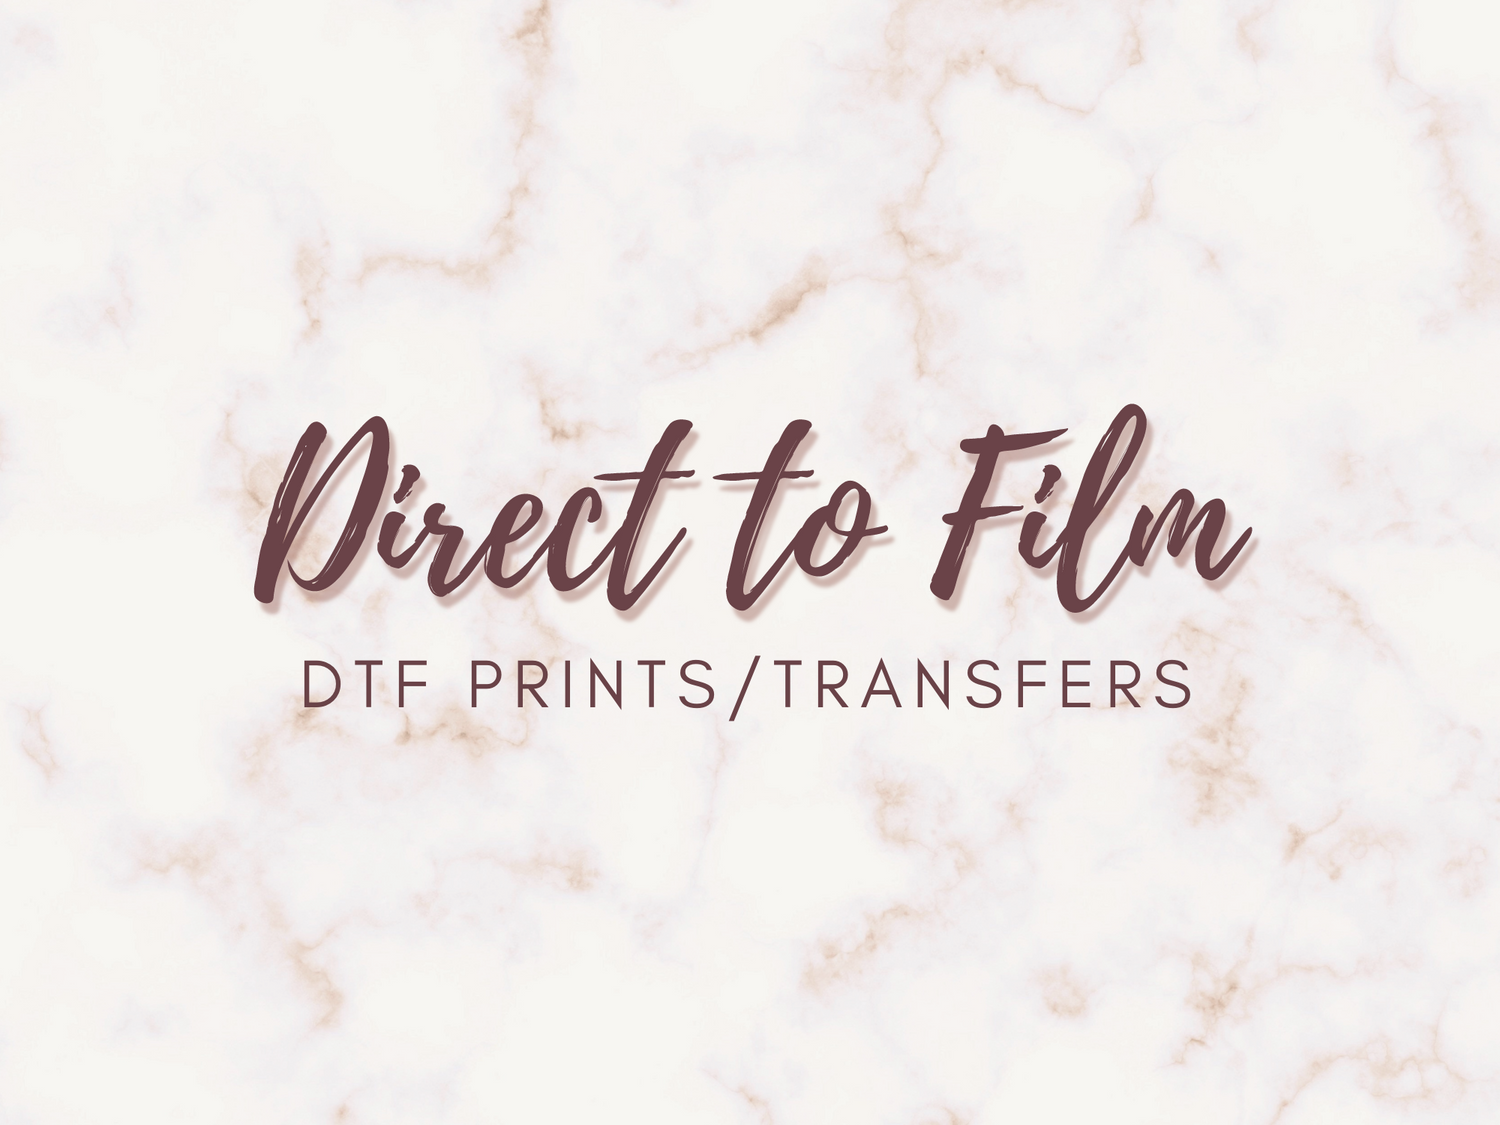 DTF (Direct to Film) Transfers/Sheets